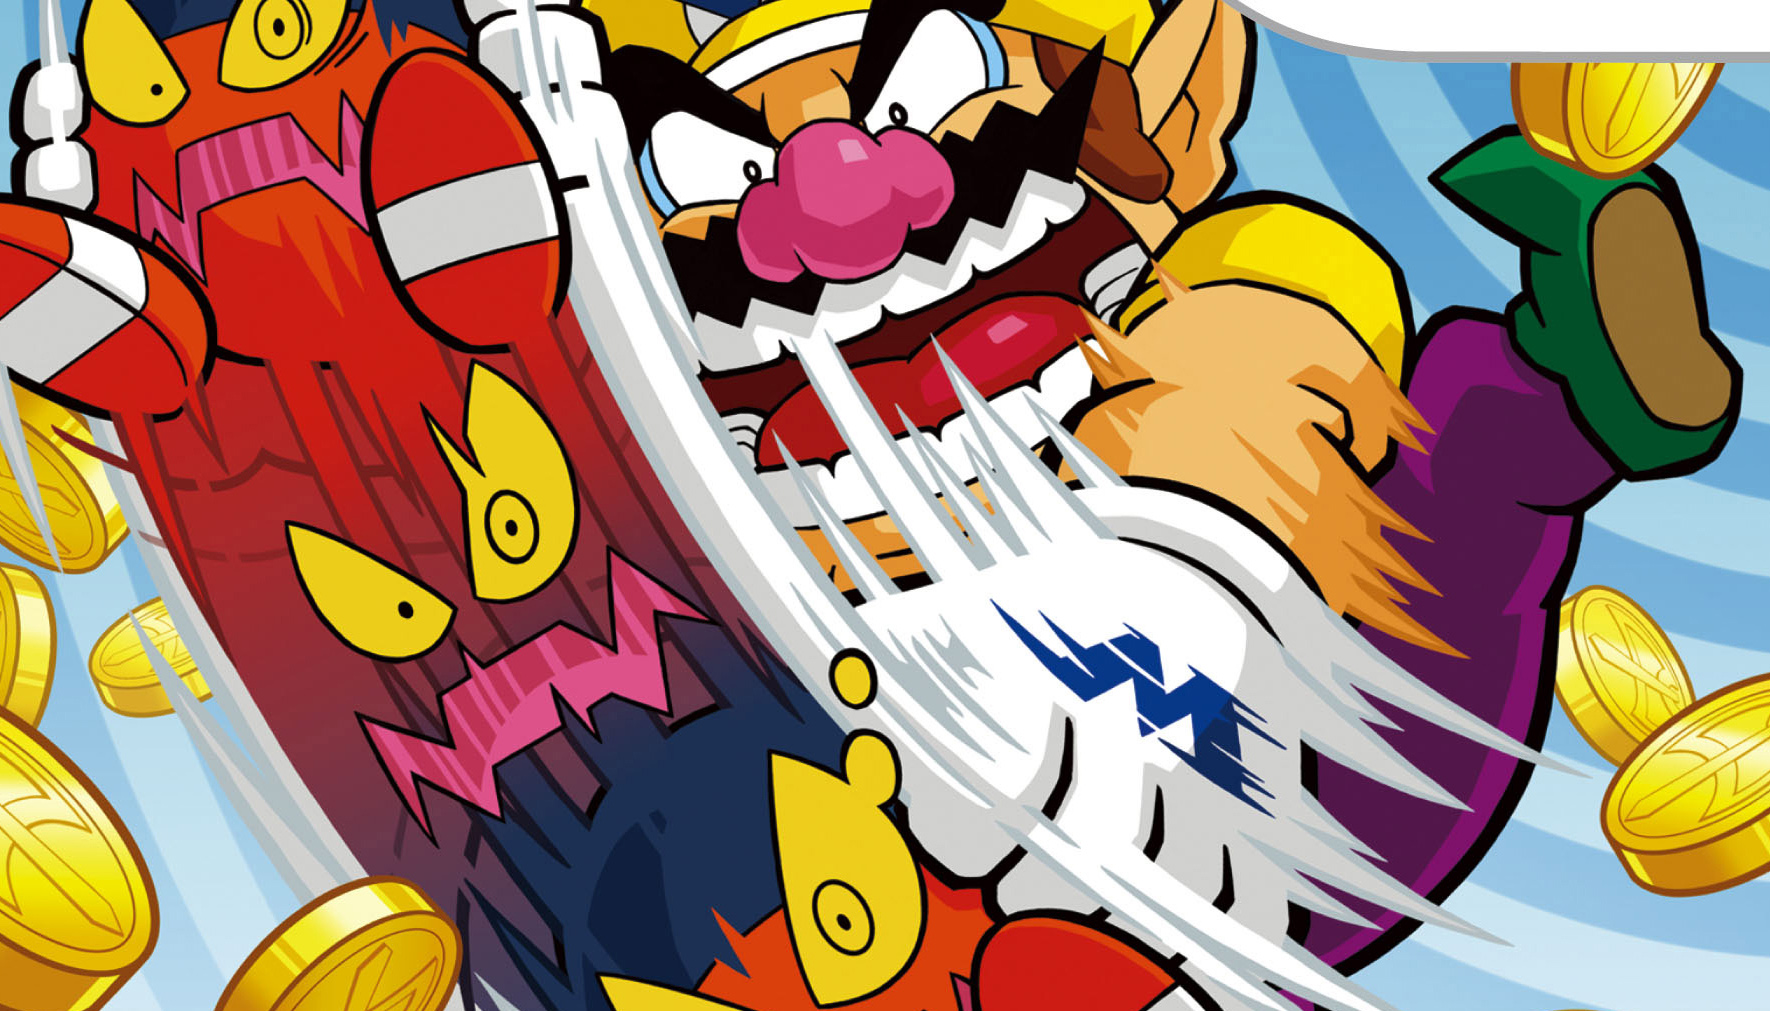 Wario Land: Shake It! - Wario brings a skateboard down on his enemies, surrounded by falling gold coins